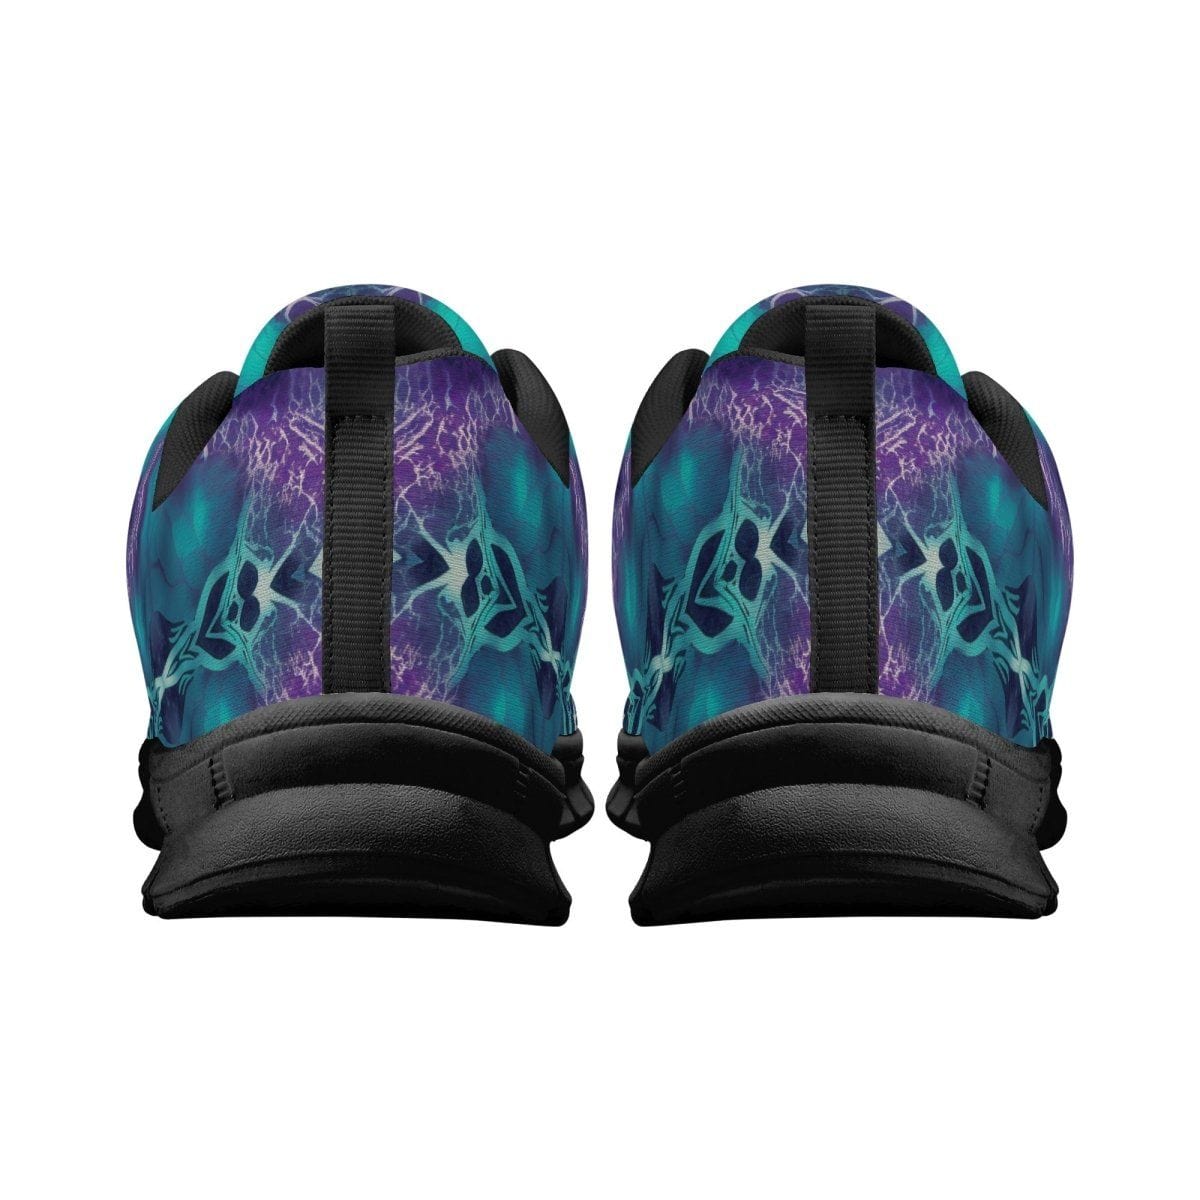 Teal and purple Mens Running Shoes | Conquer Every Mile: High-Performance Men's Running Shoes for Ultimate Comfort and Style - Iron Phoenix GHG